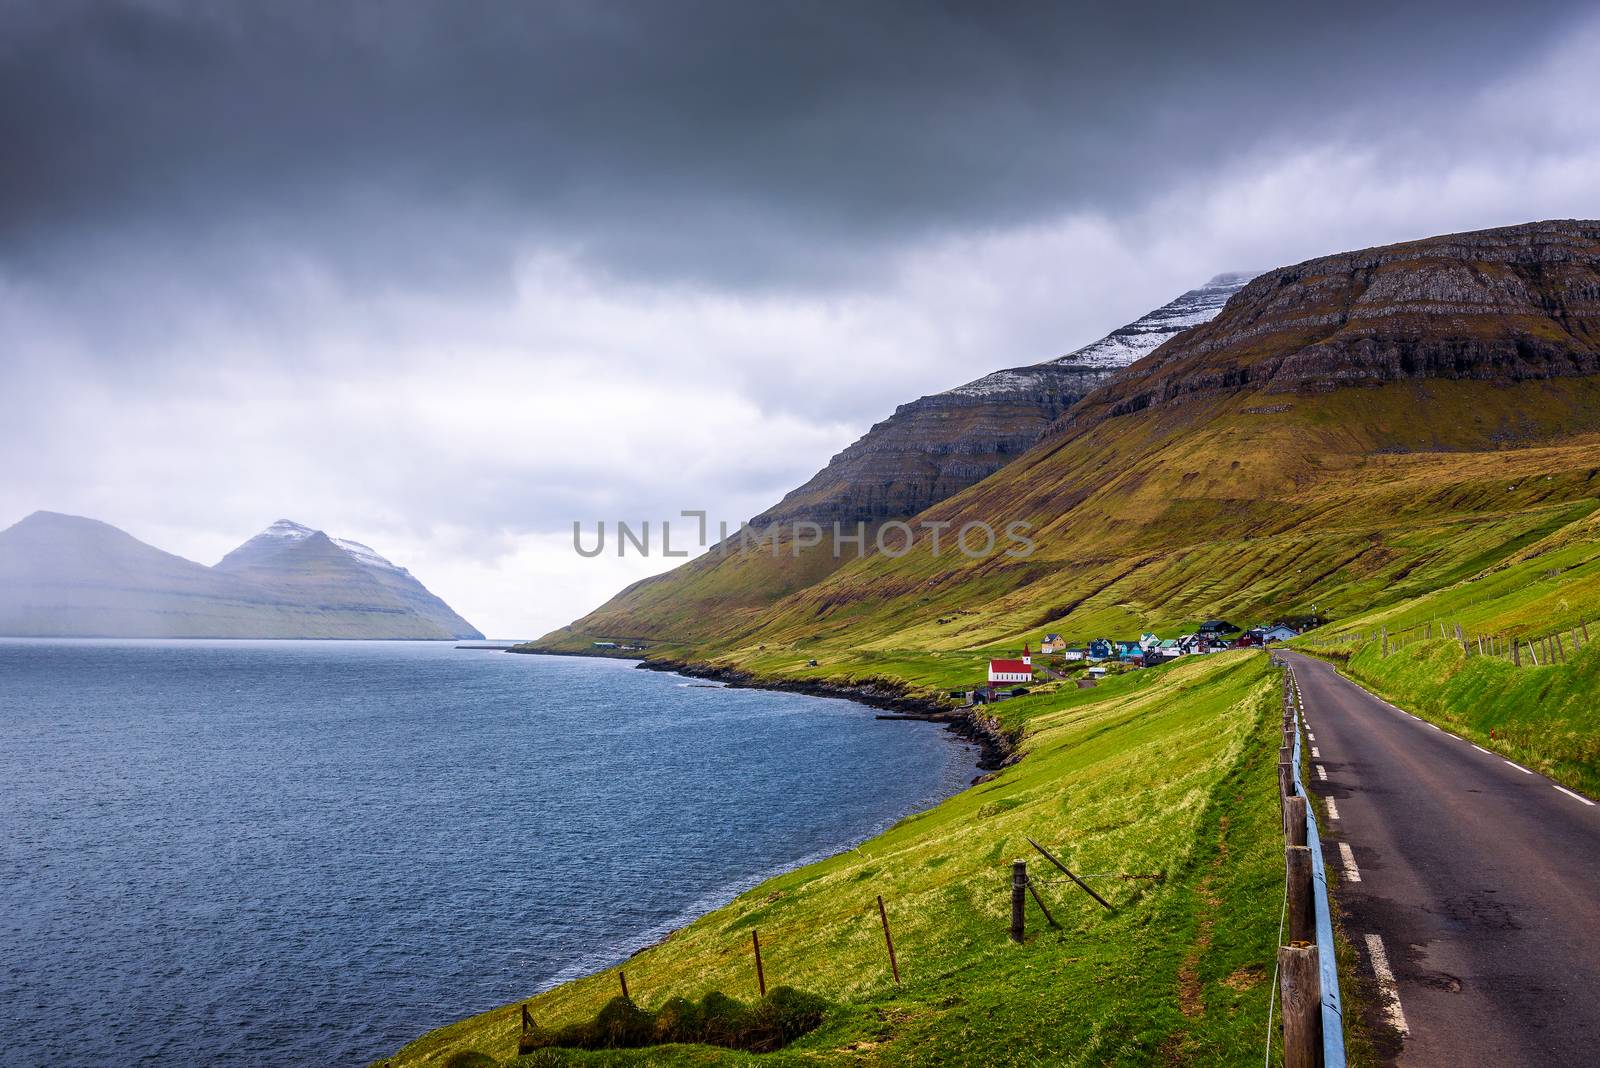 Village of Husar located on the island of Kalsoy in Faroe Islands with a road going to this small settlement.